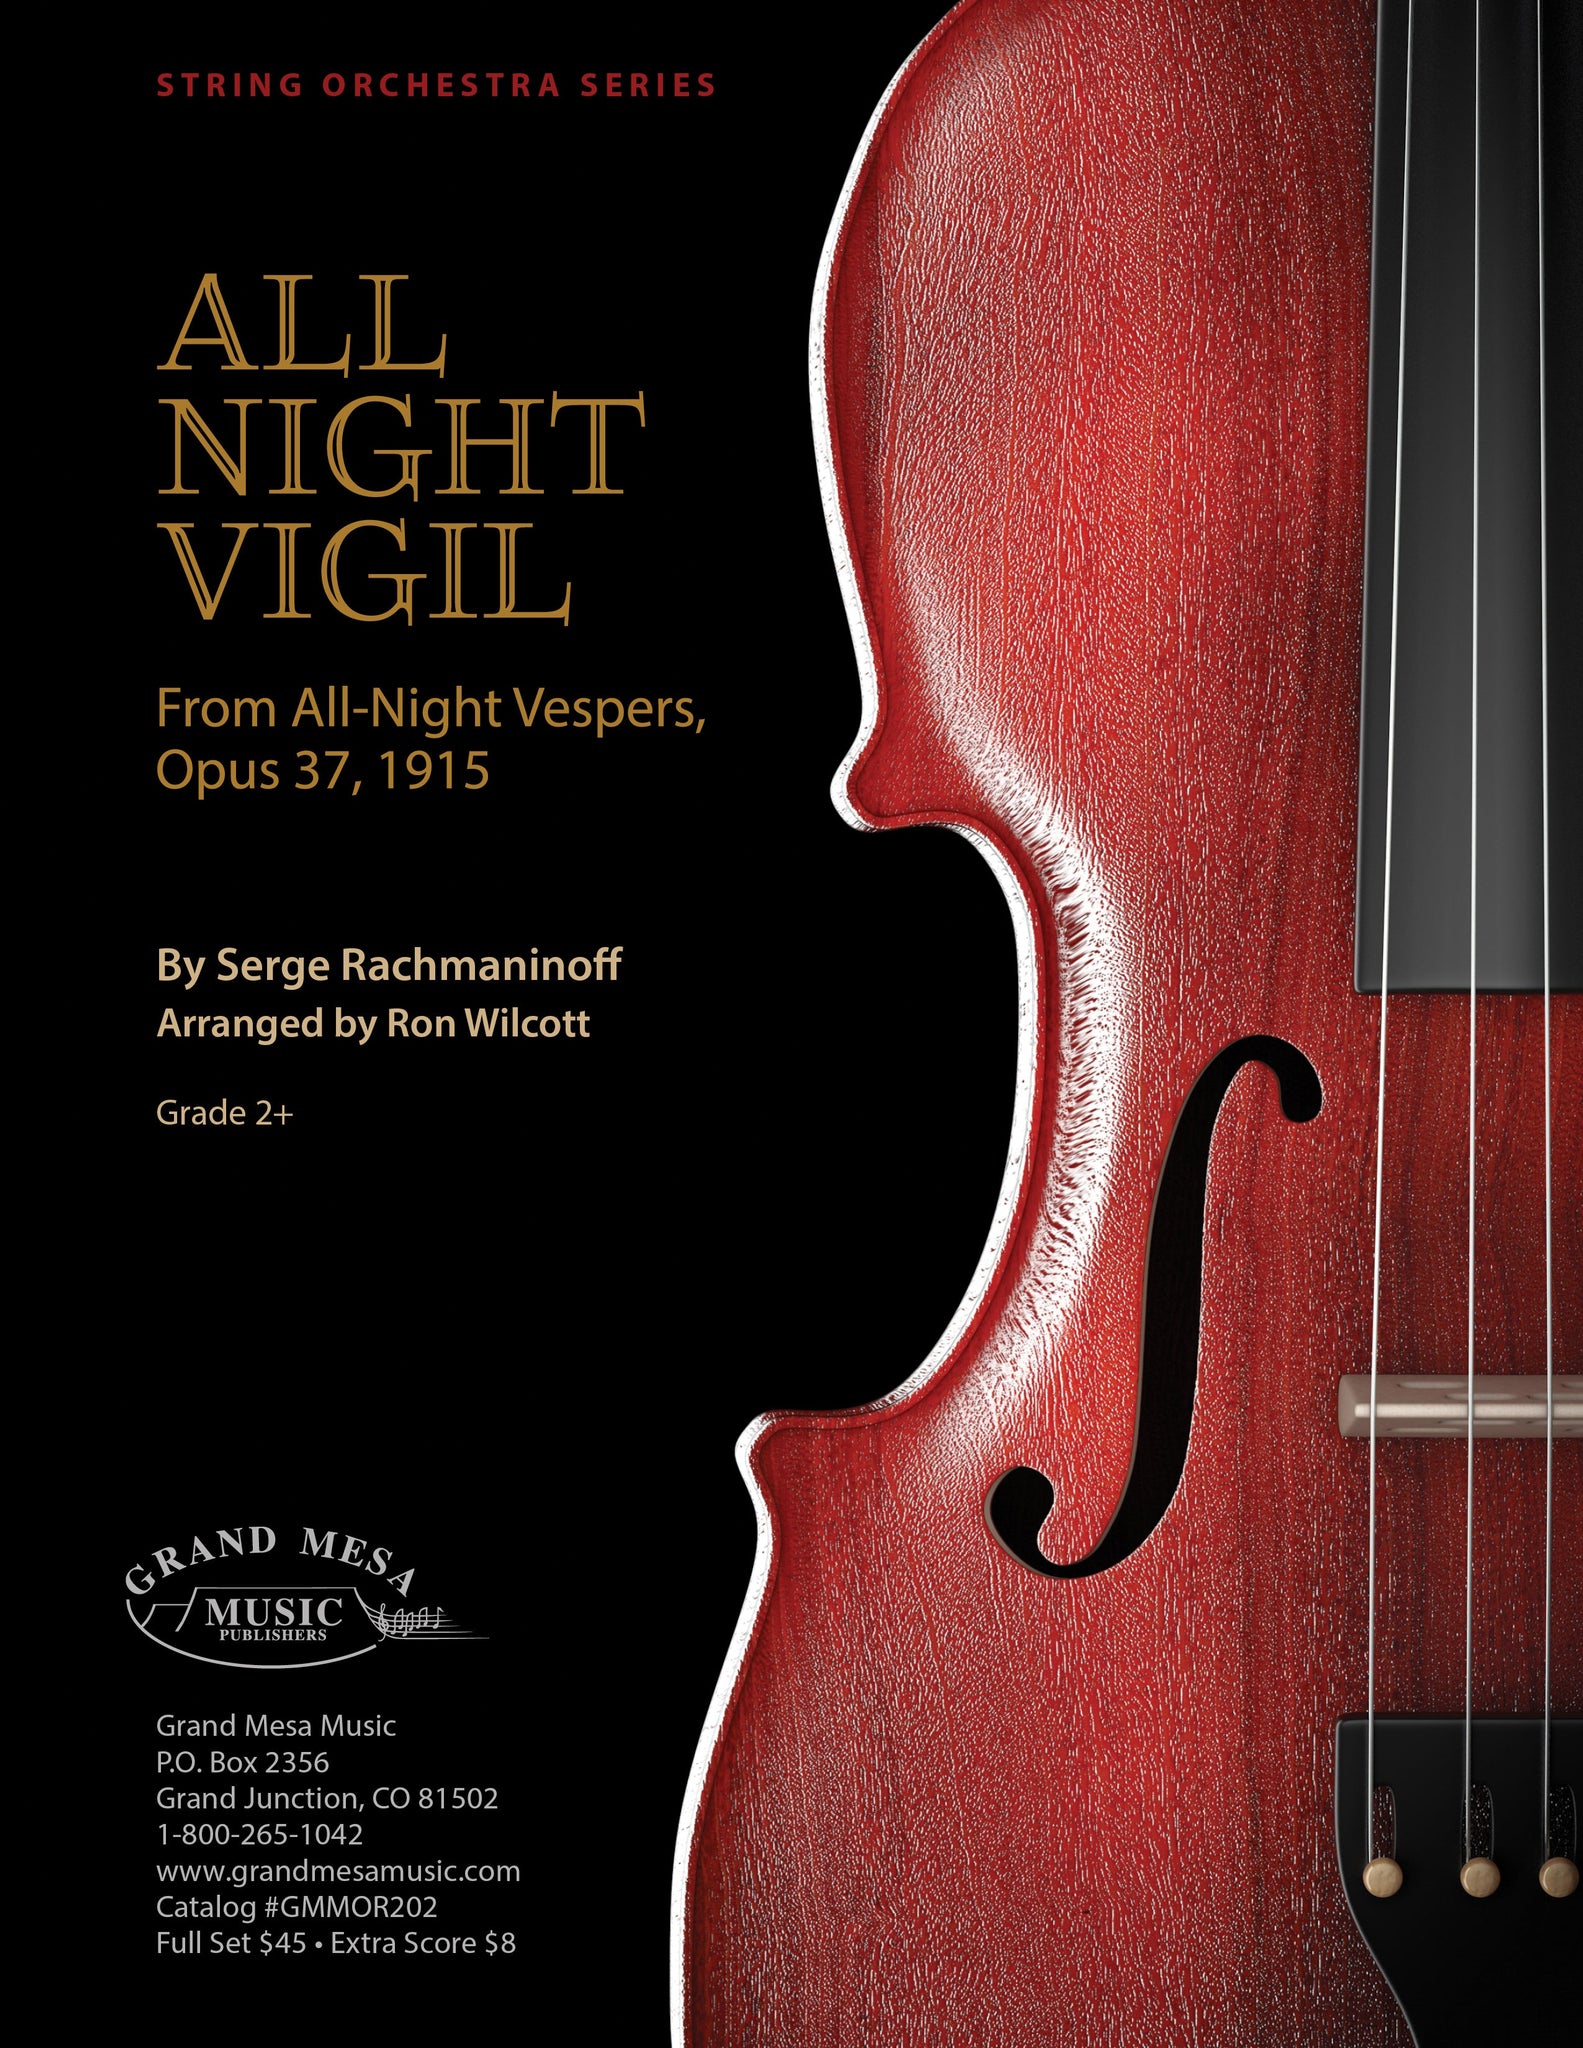 Strings sheet music cover of All Night Vigil, composed by Sergei Rachmaninoff, arranged by Ronald Wilcott.